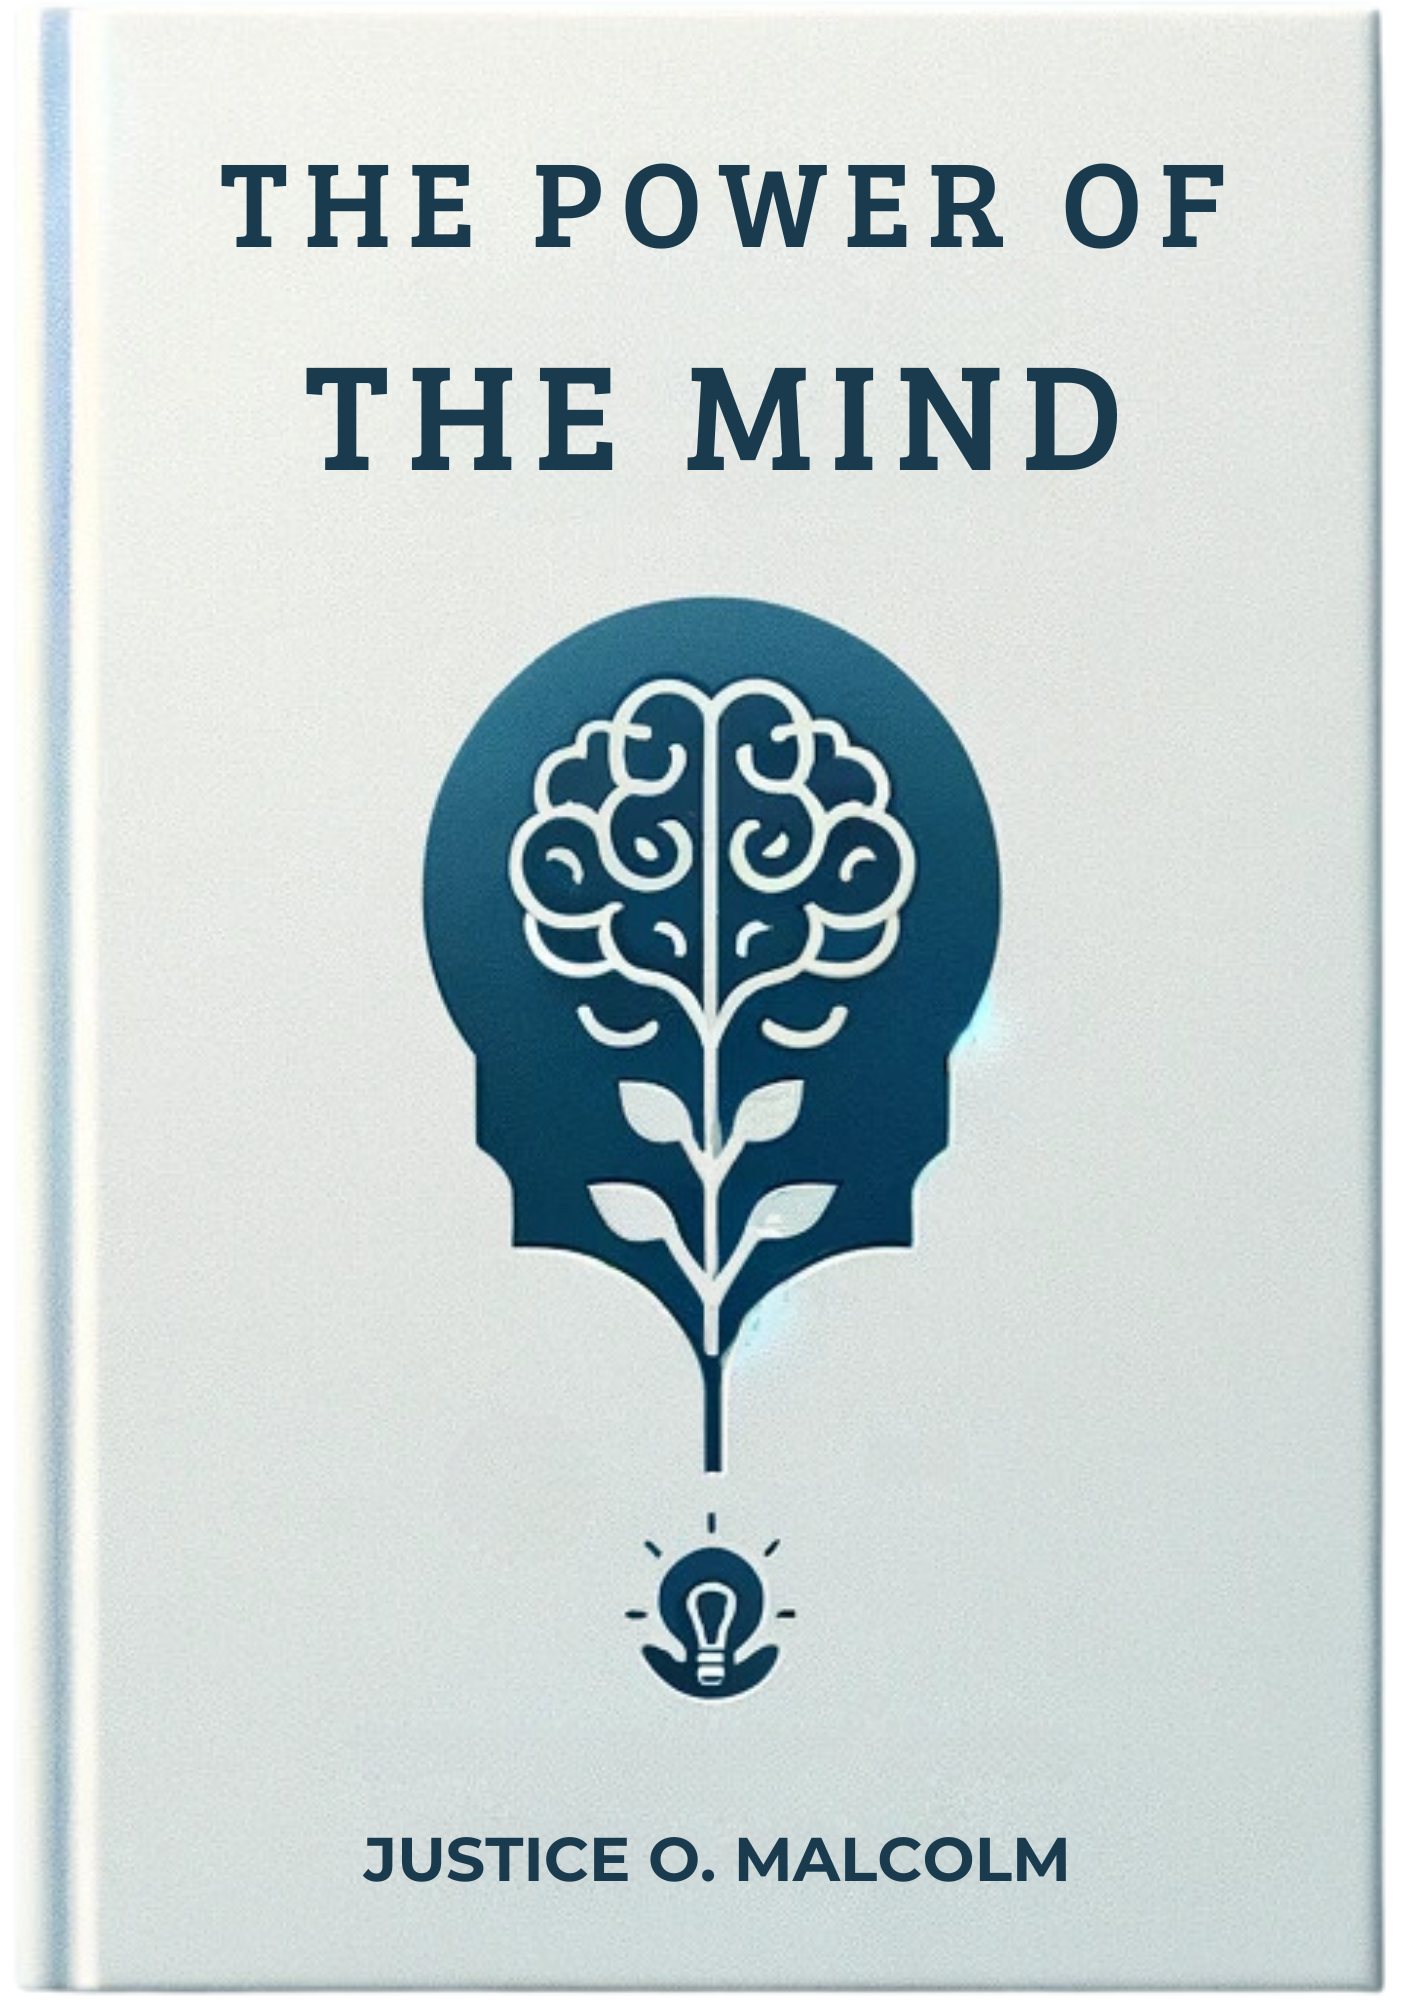 The Power Of The Mind. If You Want To Get Everything, You Must Master This